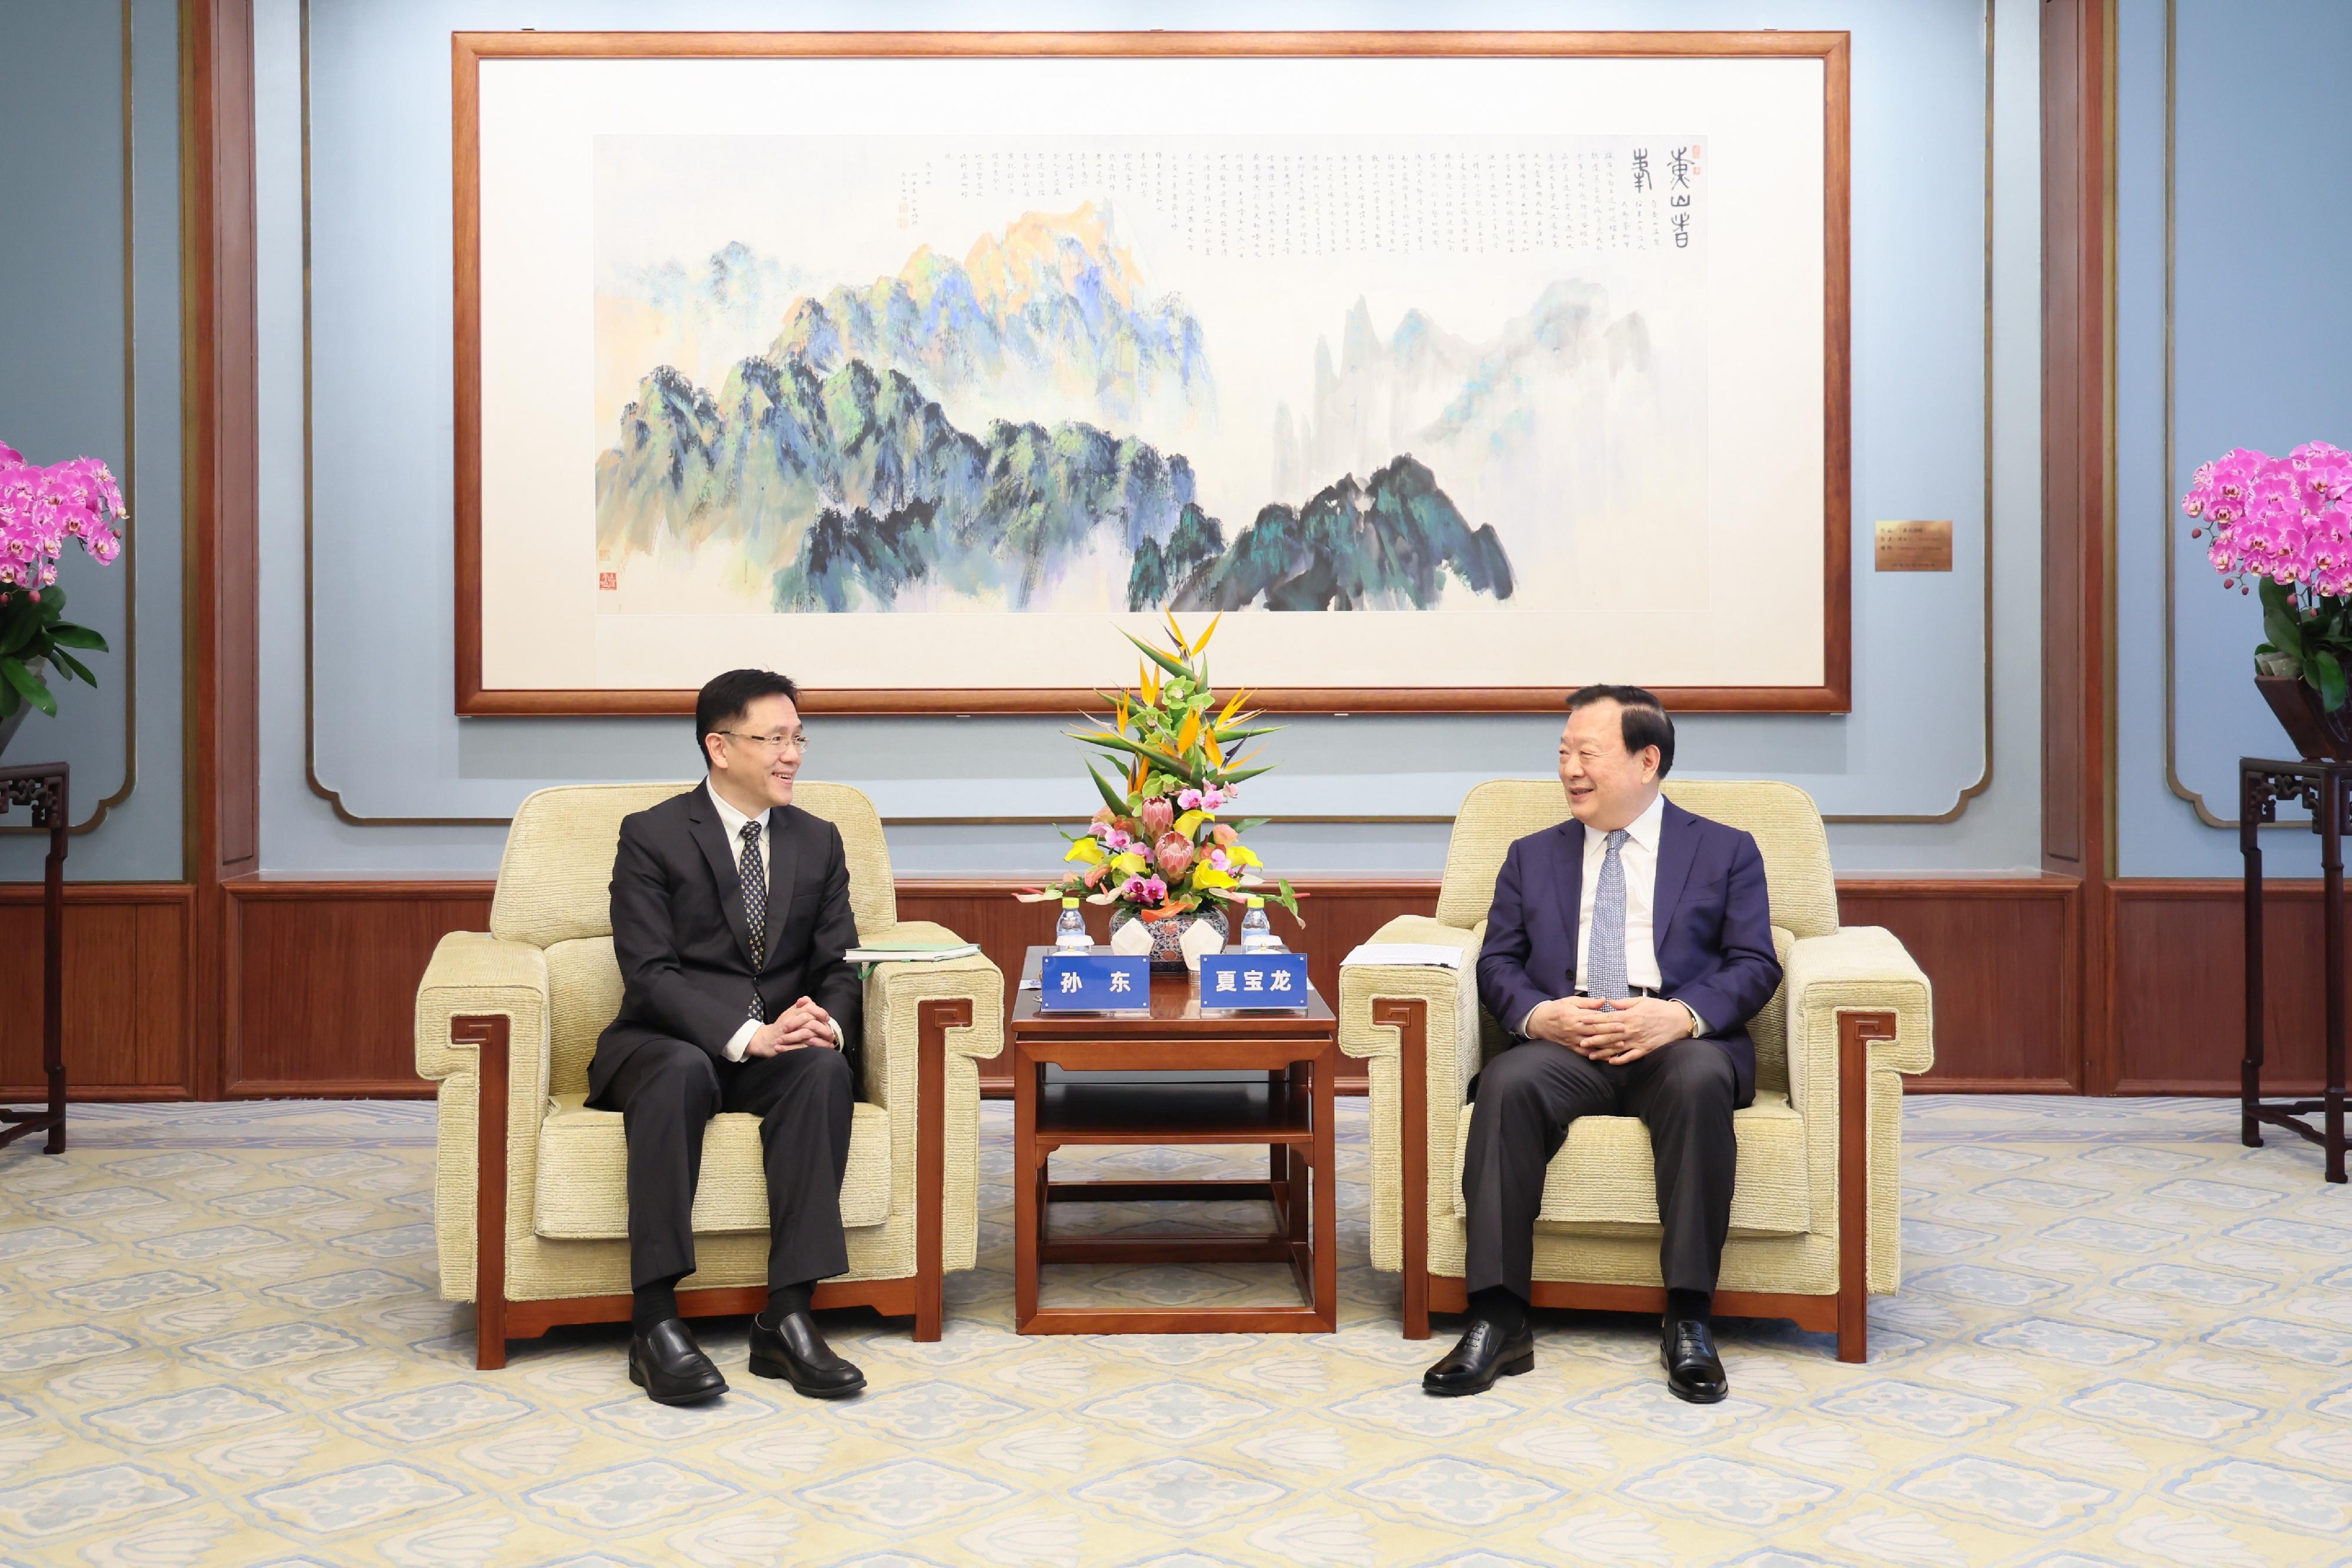 The Secretary for Innovation, Technology and Industry, Professor Sun Dong (left), visited the Hong Kong and Macao Affairs Office (HKMAO) of the State Council in Beijing today (May 9) and called on the Director of the HKMAO of the State Council, Mr Xia Baolong (right).